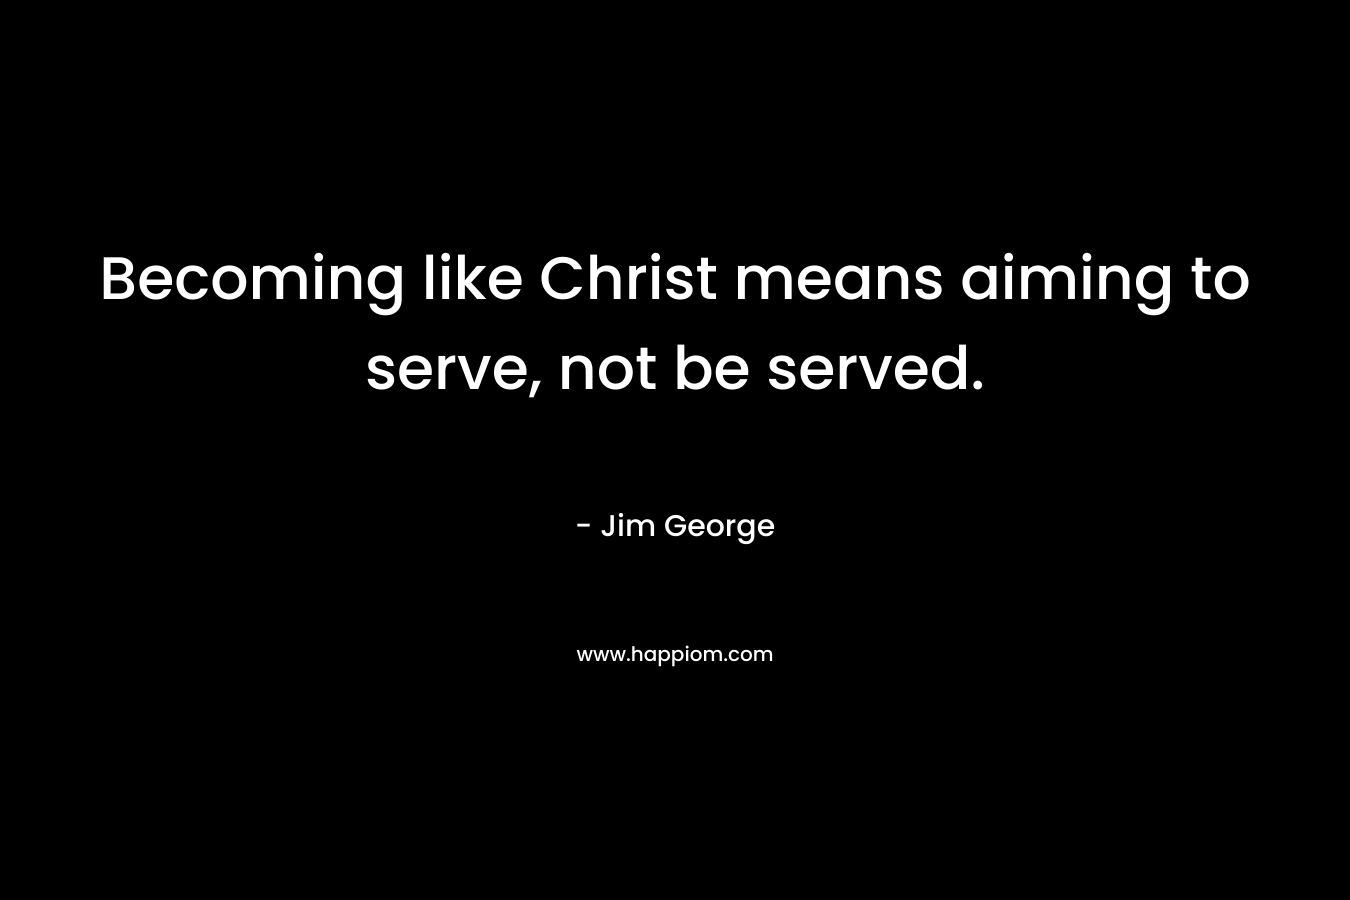 Becoming like Christ means aiming to serve, not be served. – Jim George